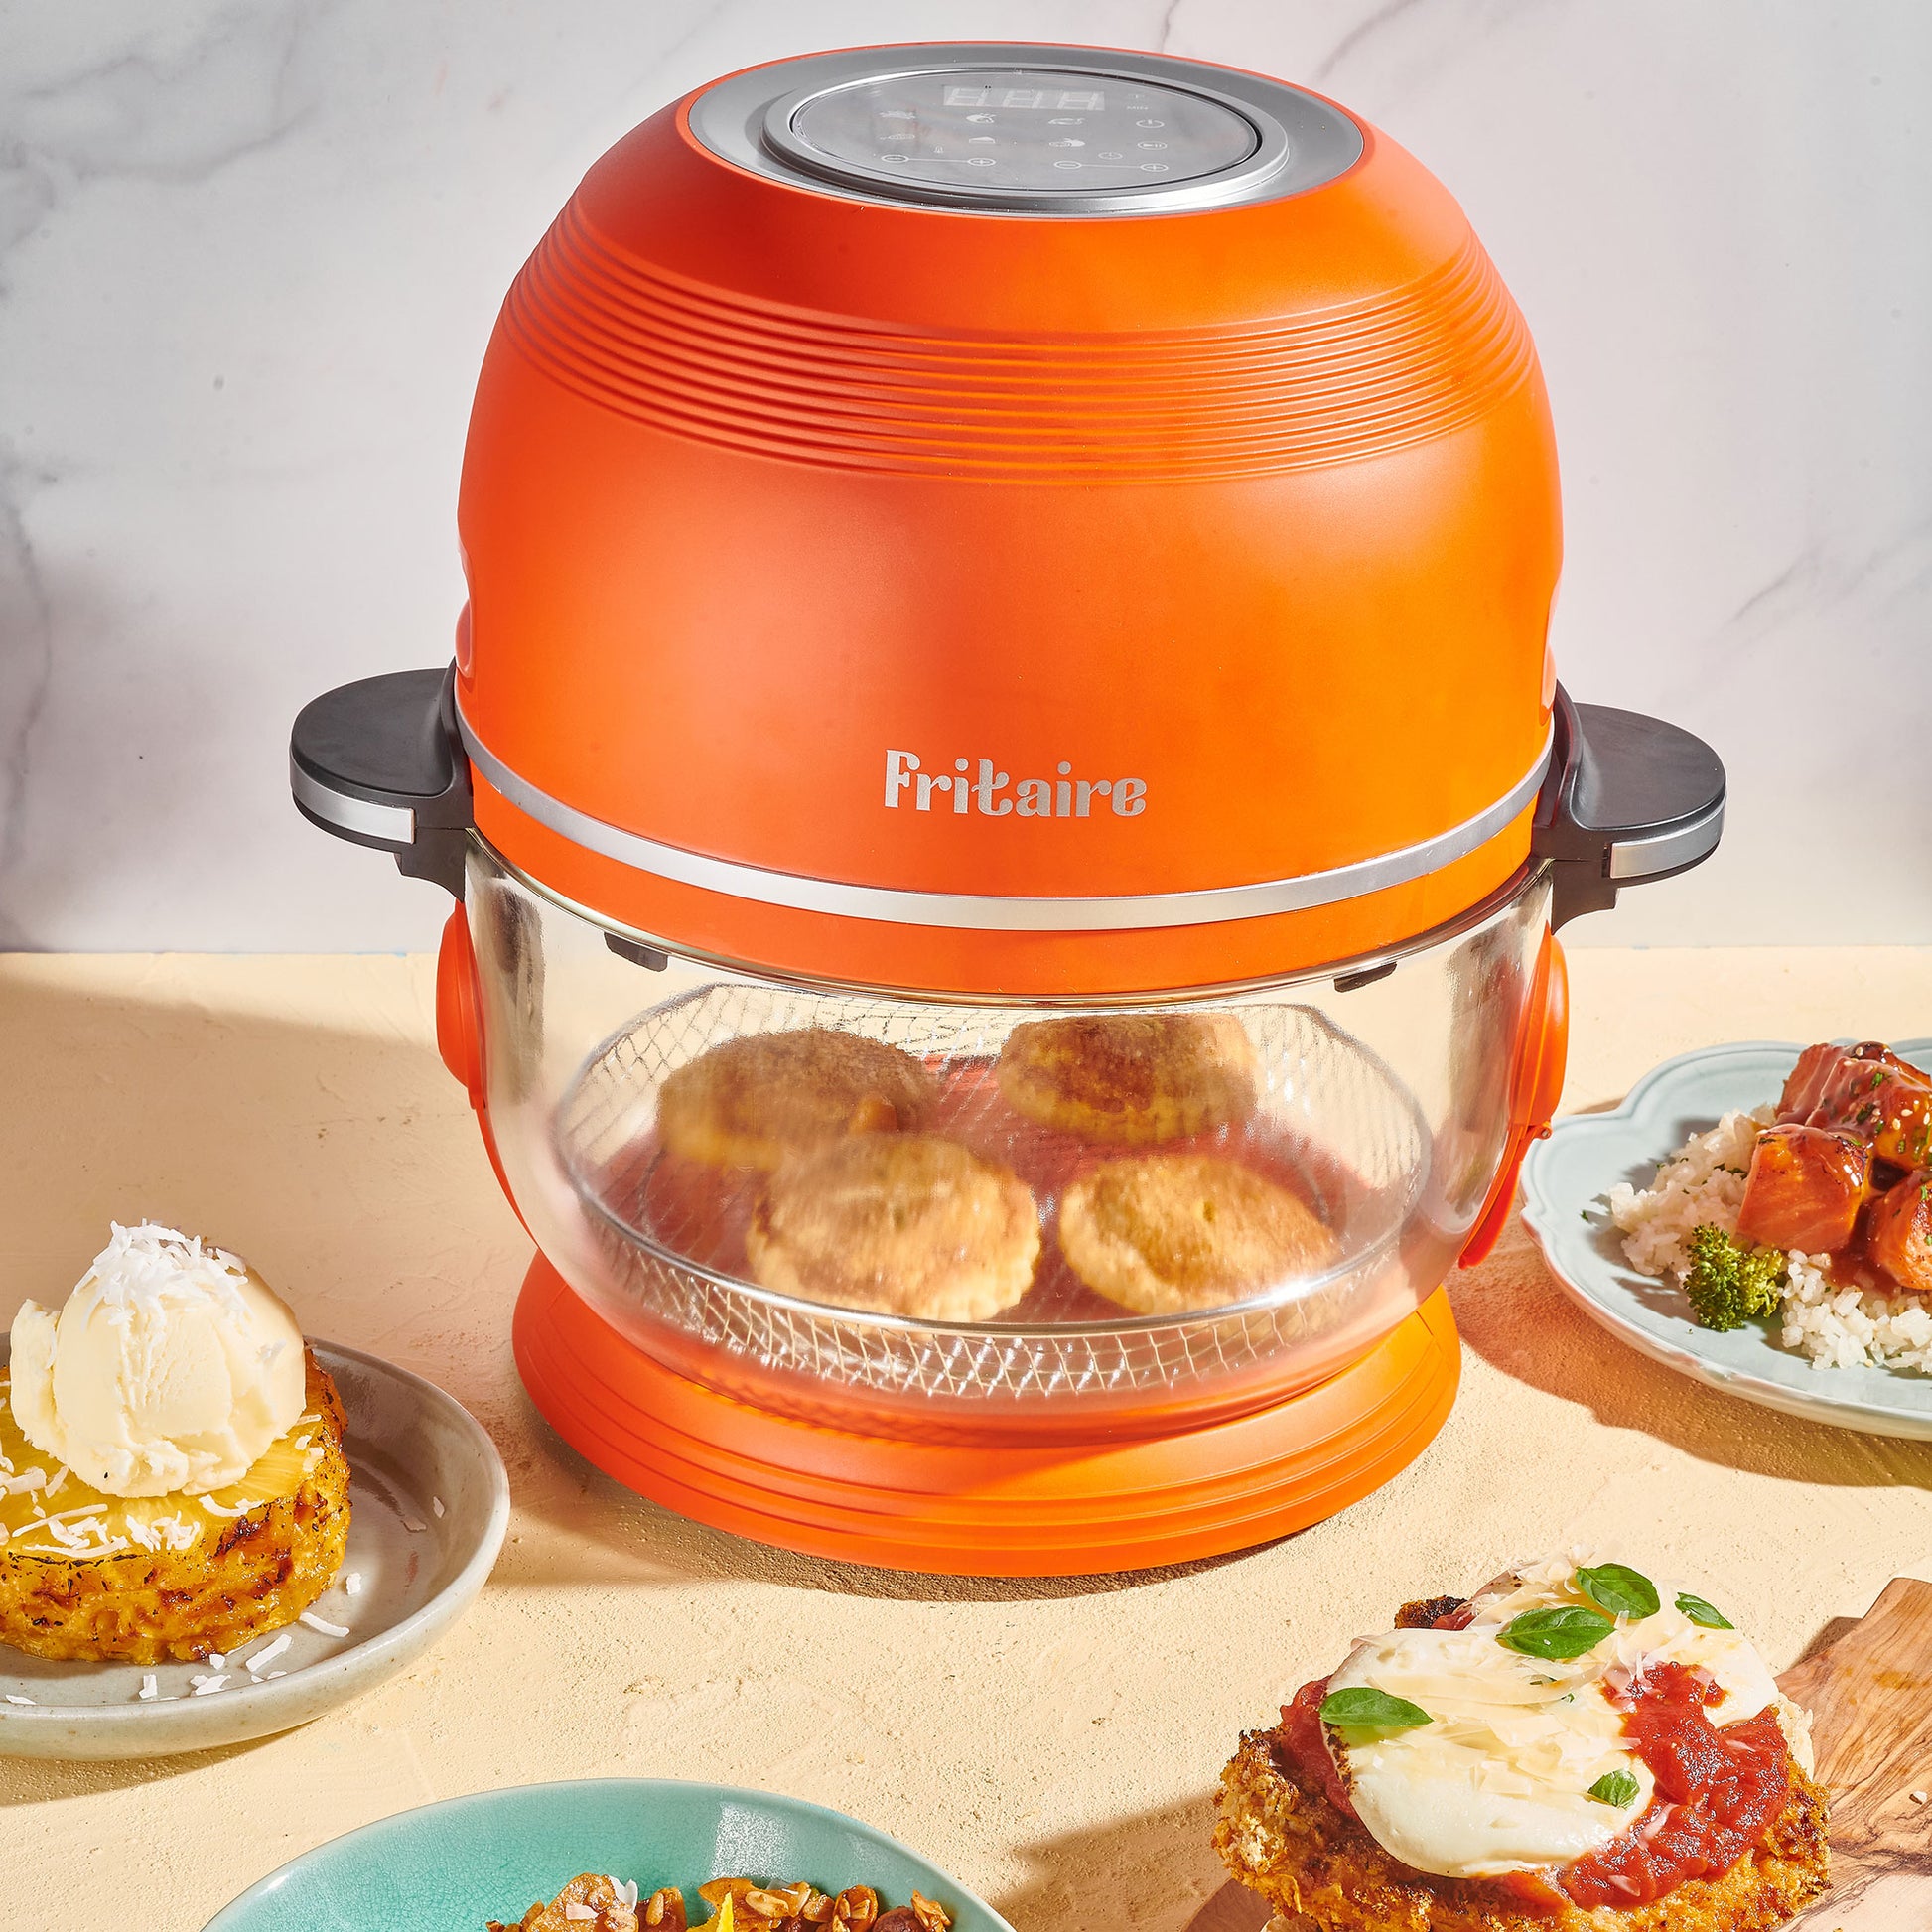 Fritaire BPA Free and Self-Cleaning Glass Bowl Air Fryer - Orange